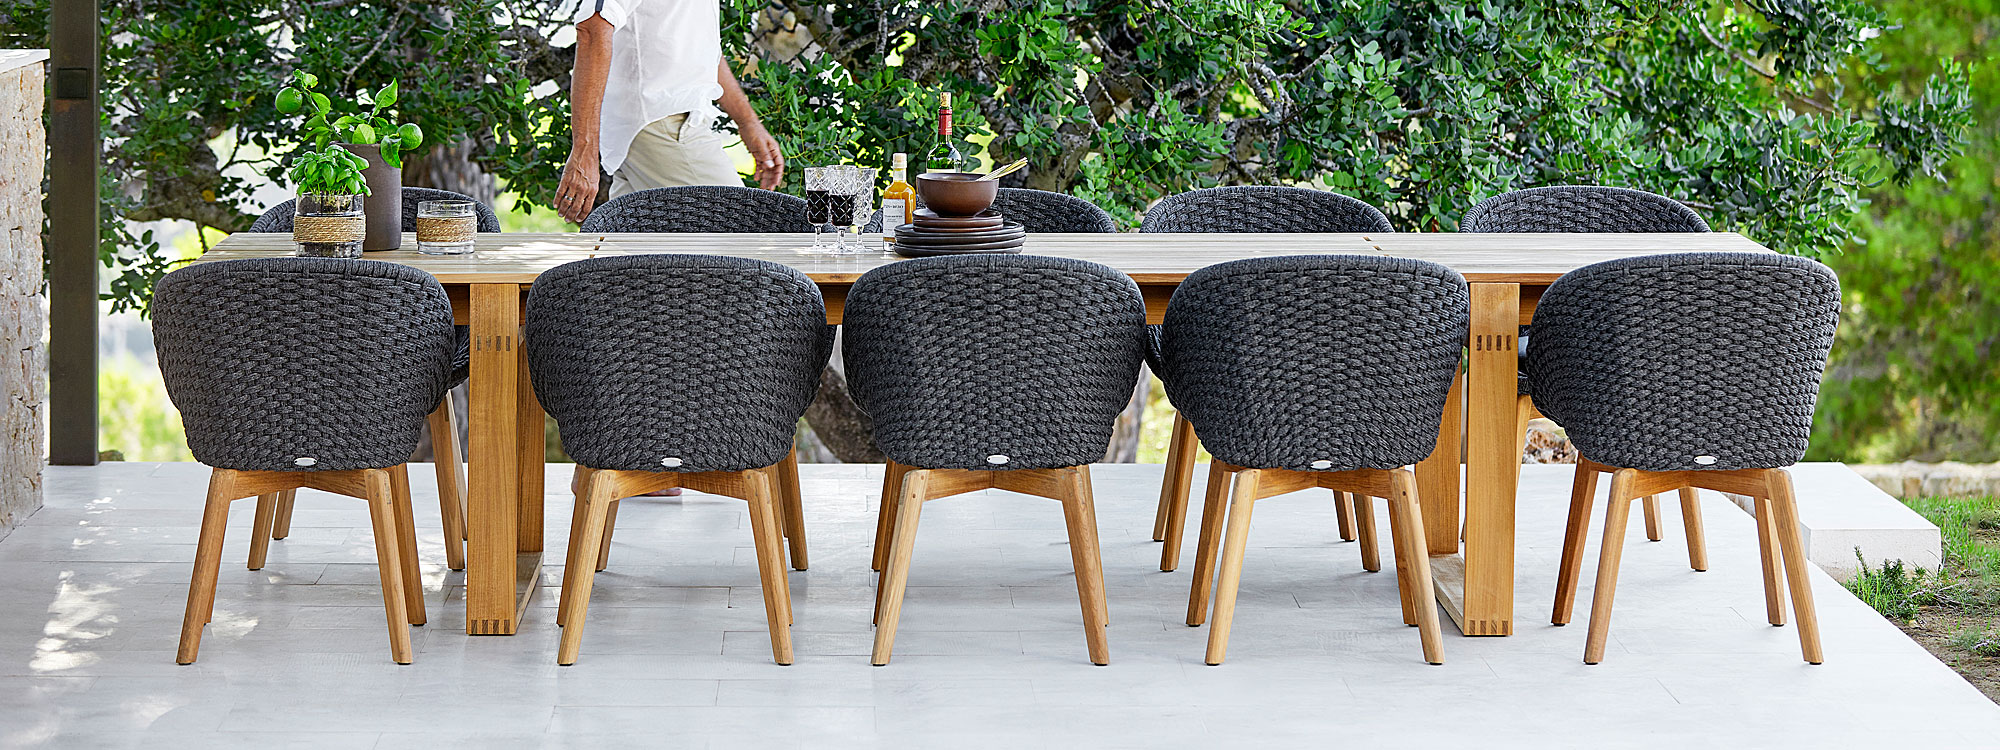 Dark Grey Peacock woven garden dining chair is a modern garden furniture chair in all-weather furniture materials by Cane-line luxury outdoor furniture